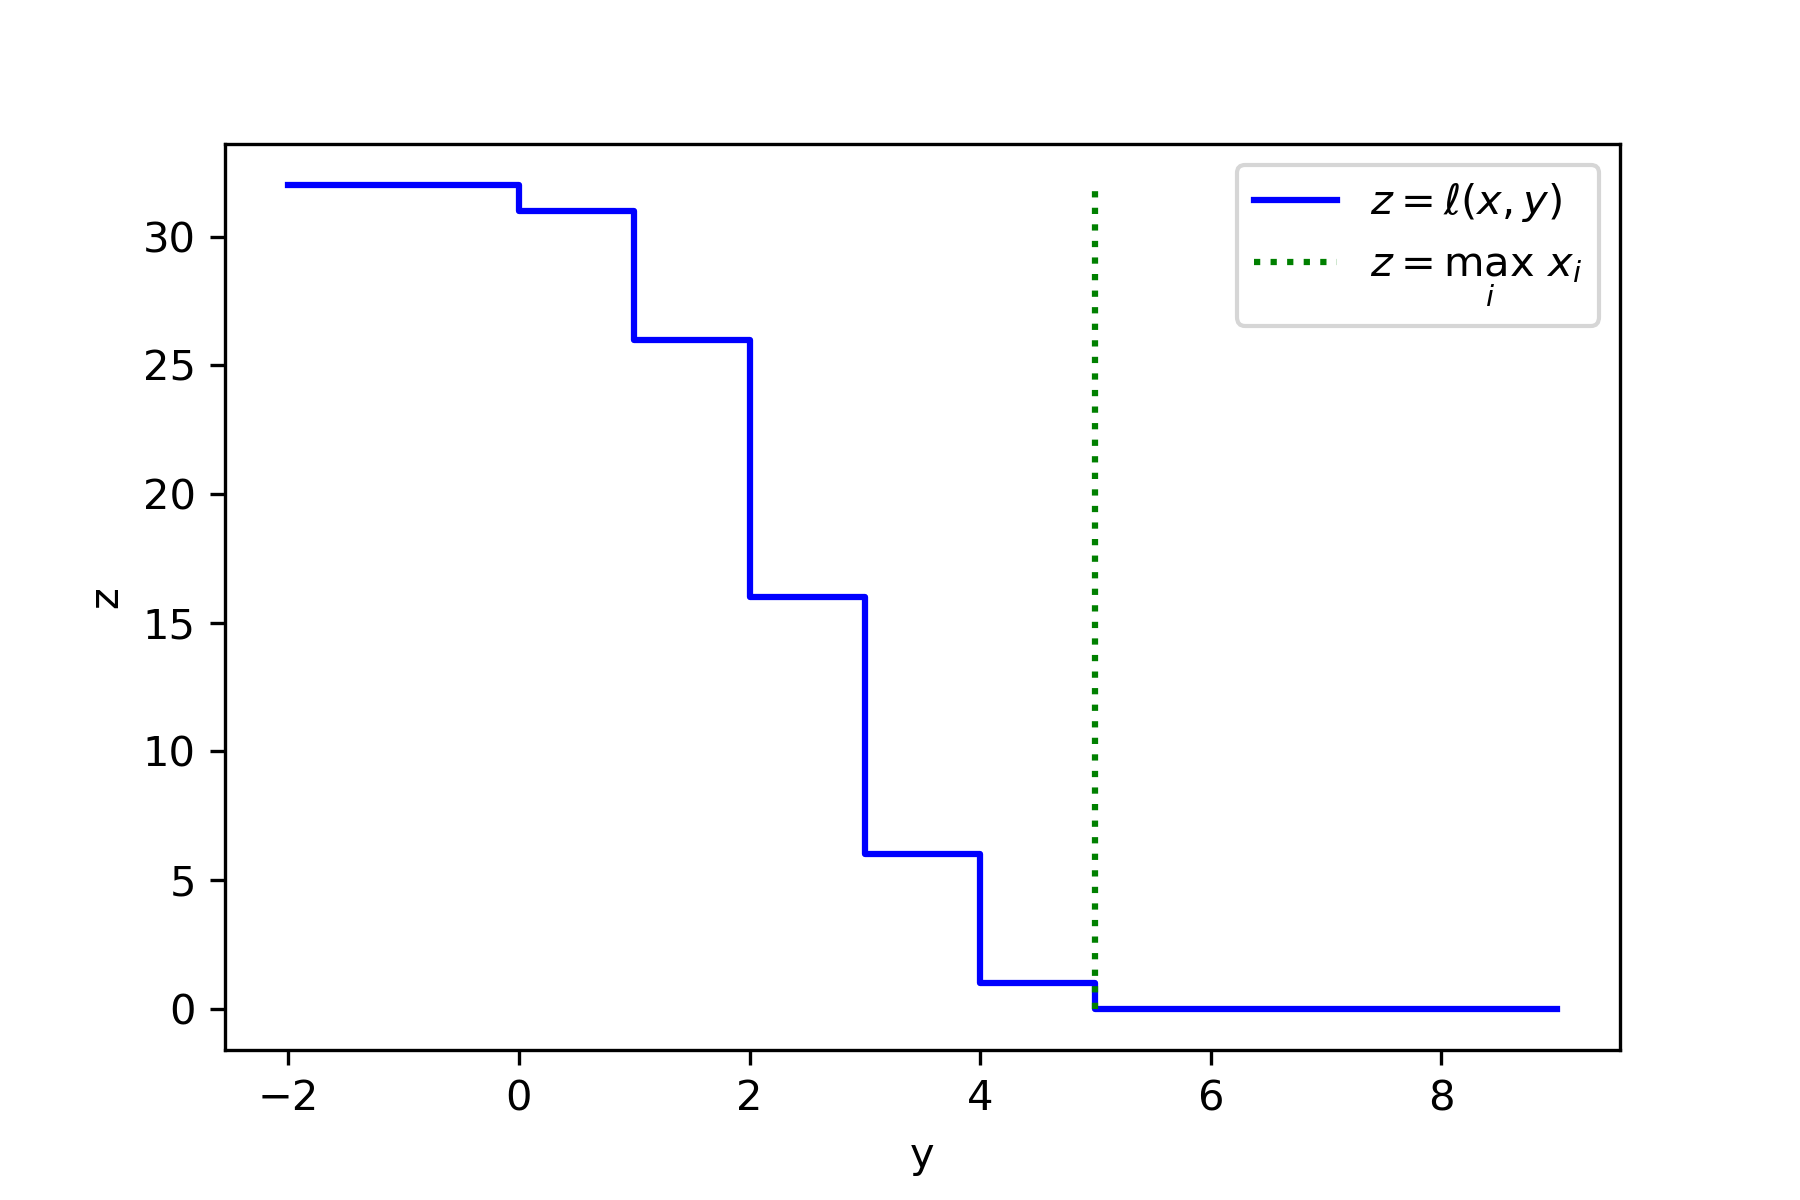 Plot of the loss corresponding to the maximum where the dataset exactly matches Binomial(5,0.5). This is a decreasing function with steps. There is also a vertical line indicating the true maximum value.